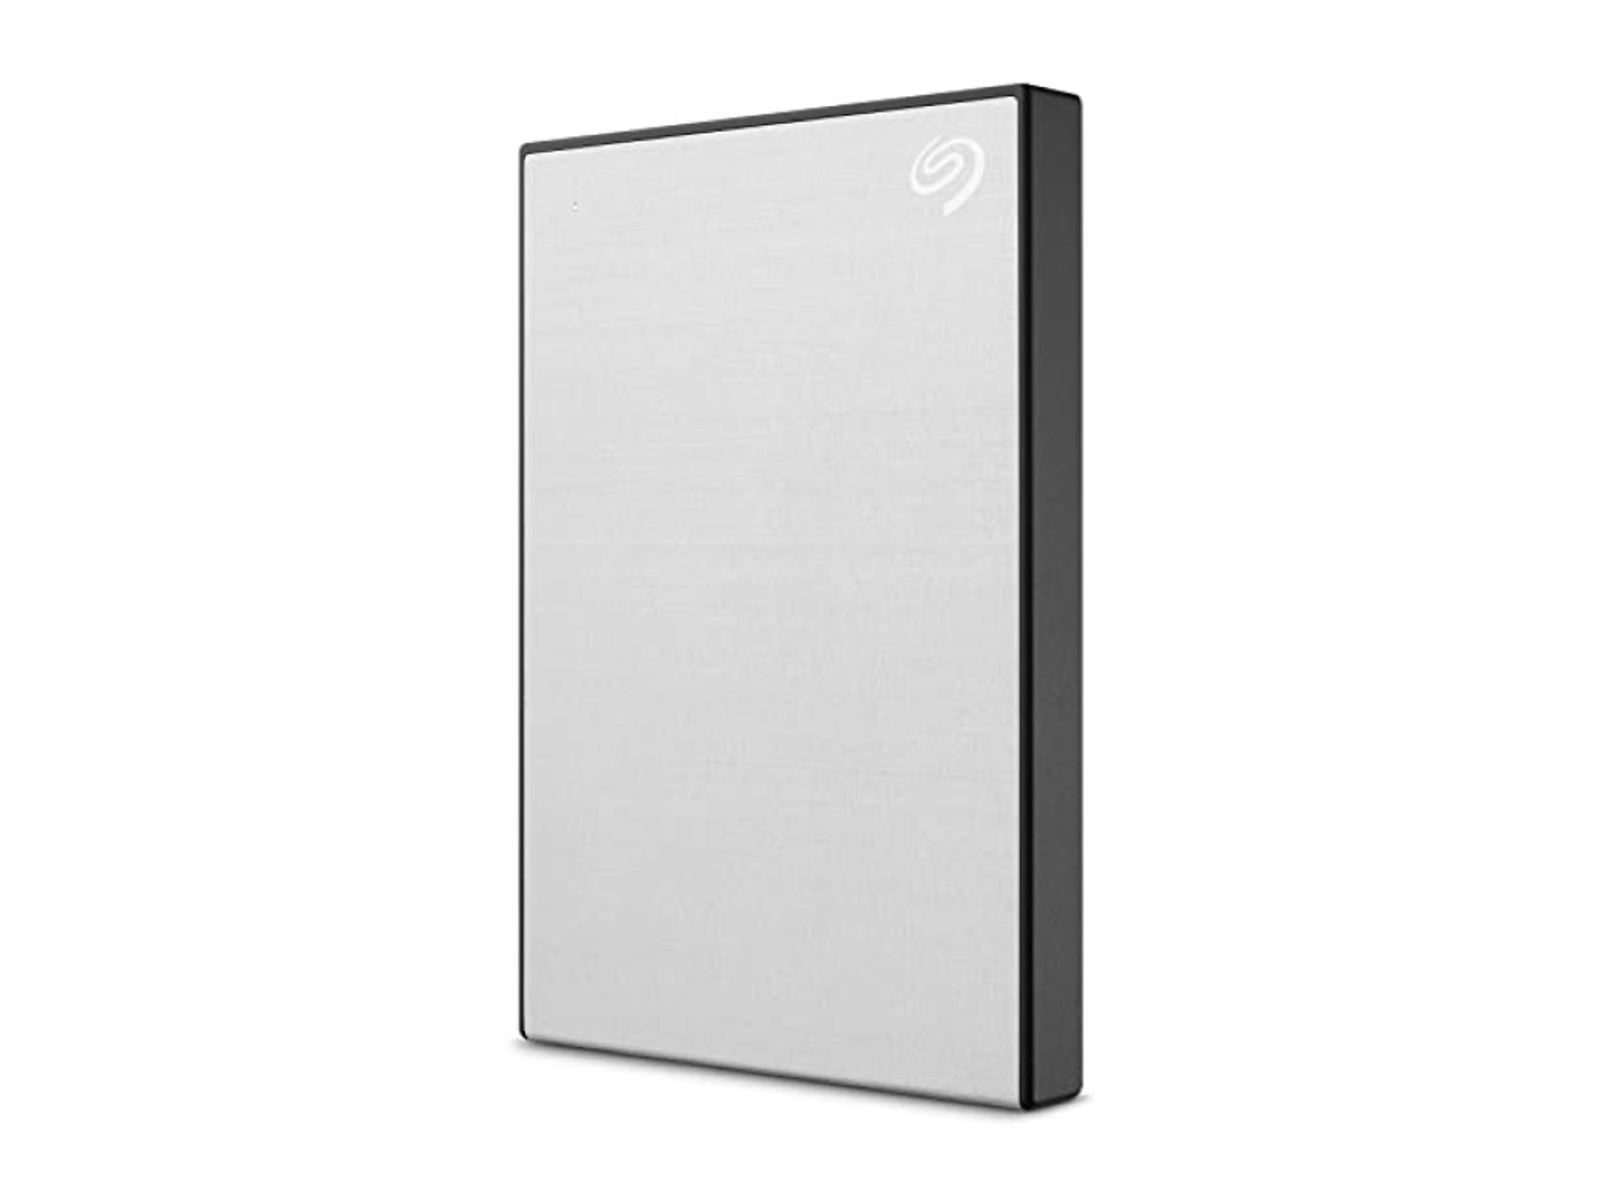 SEAGATE STKC4000401 ONETOUCHPORT. 2,5 4TB extern, SILBER, TB Zoll, Silber 4 HDD